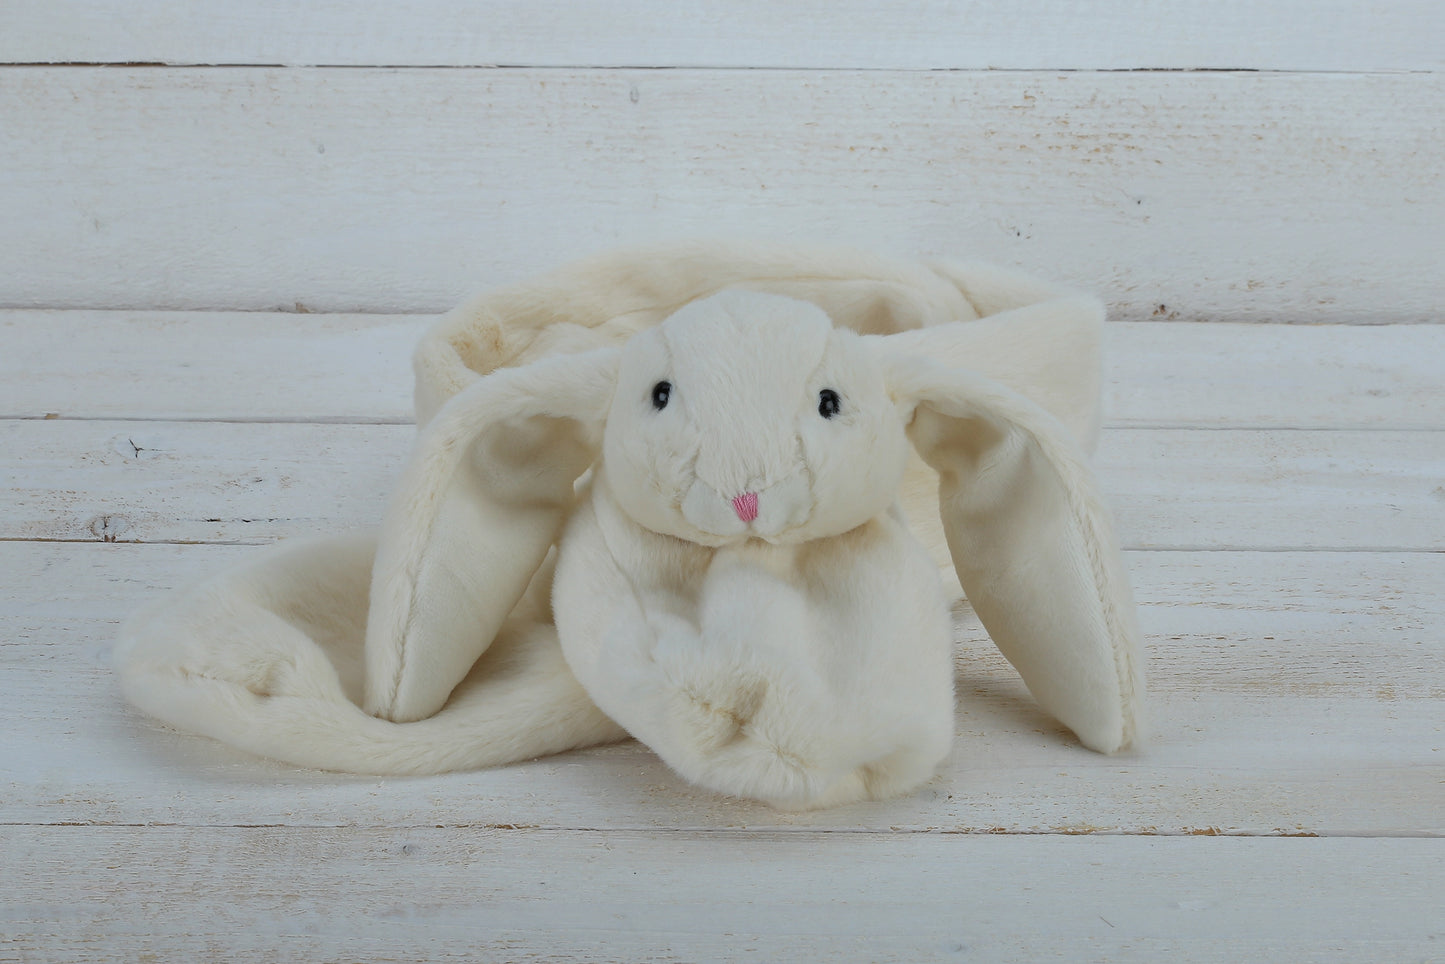 Bunny Plush Soft Snuggly Scarf Cream 90cm - Fits All Ages